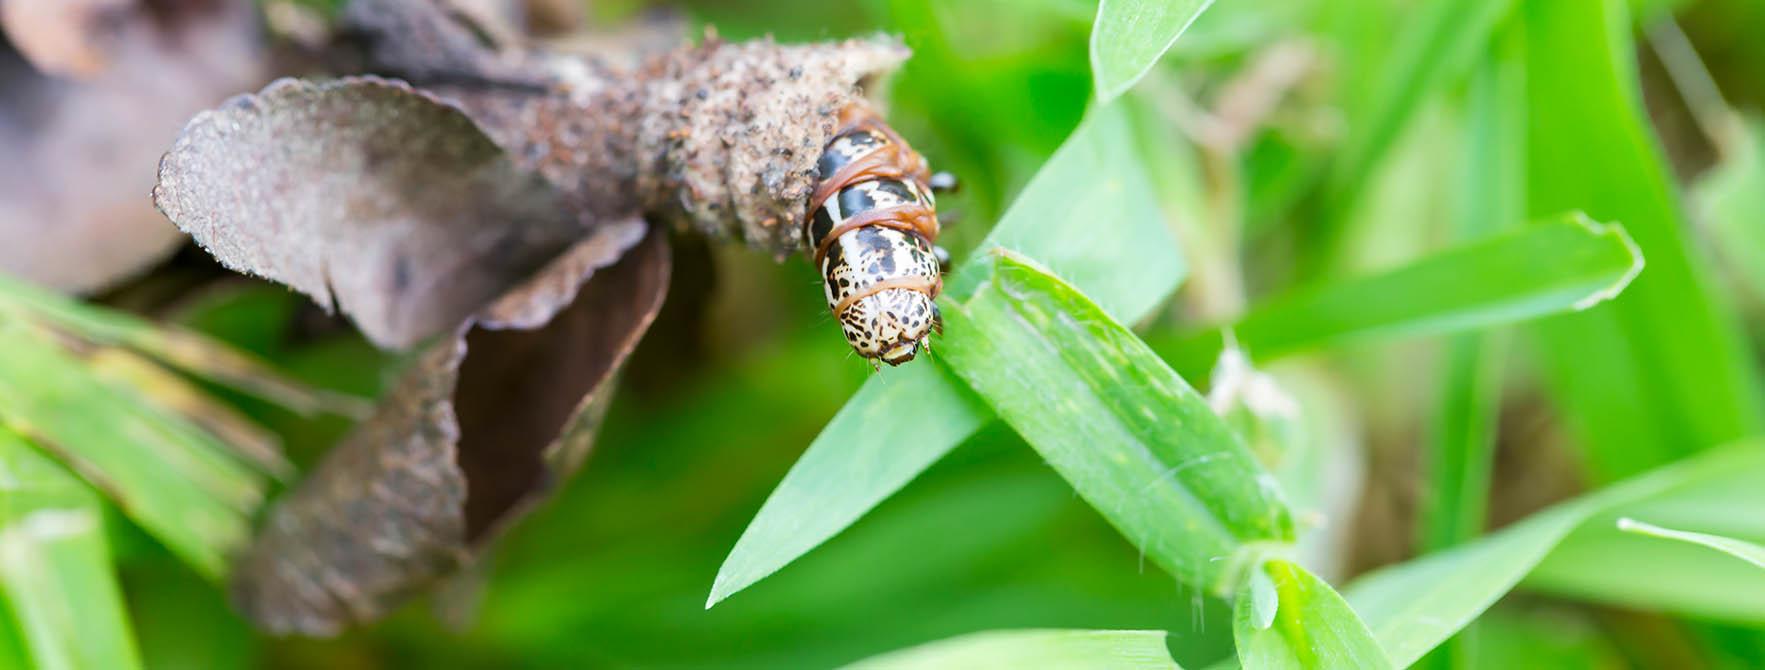 Bagworm Life Cycle | Bagworms Control | Get Rid of Bagworms